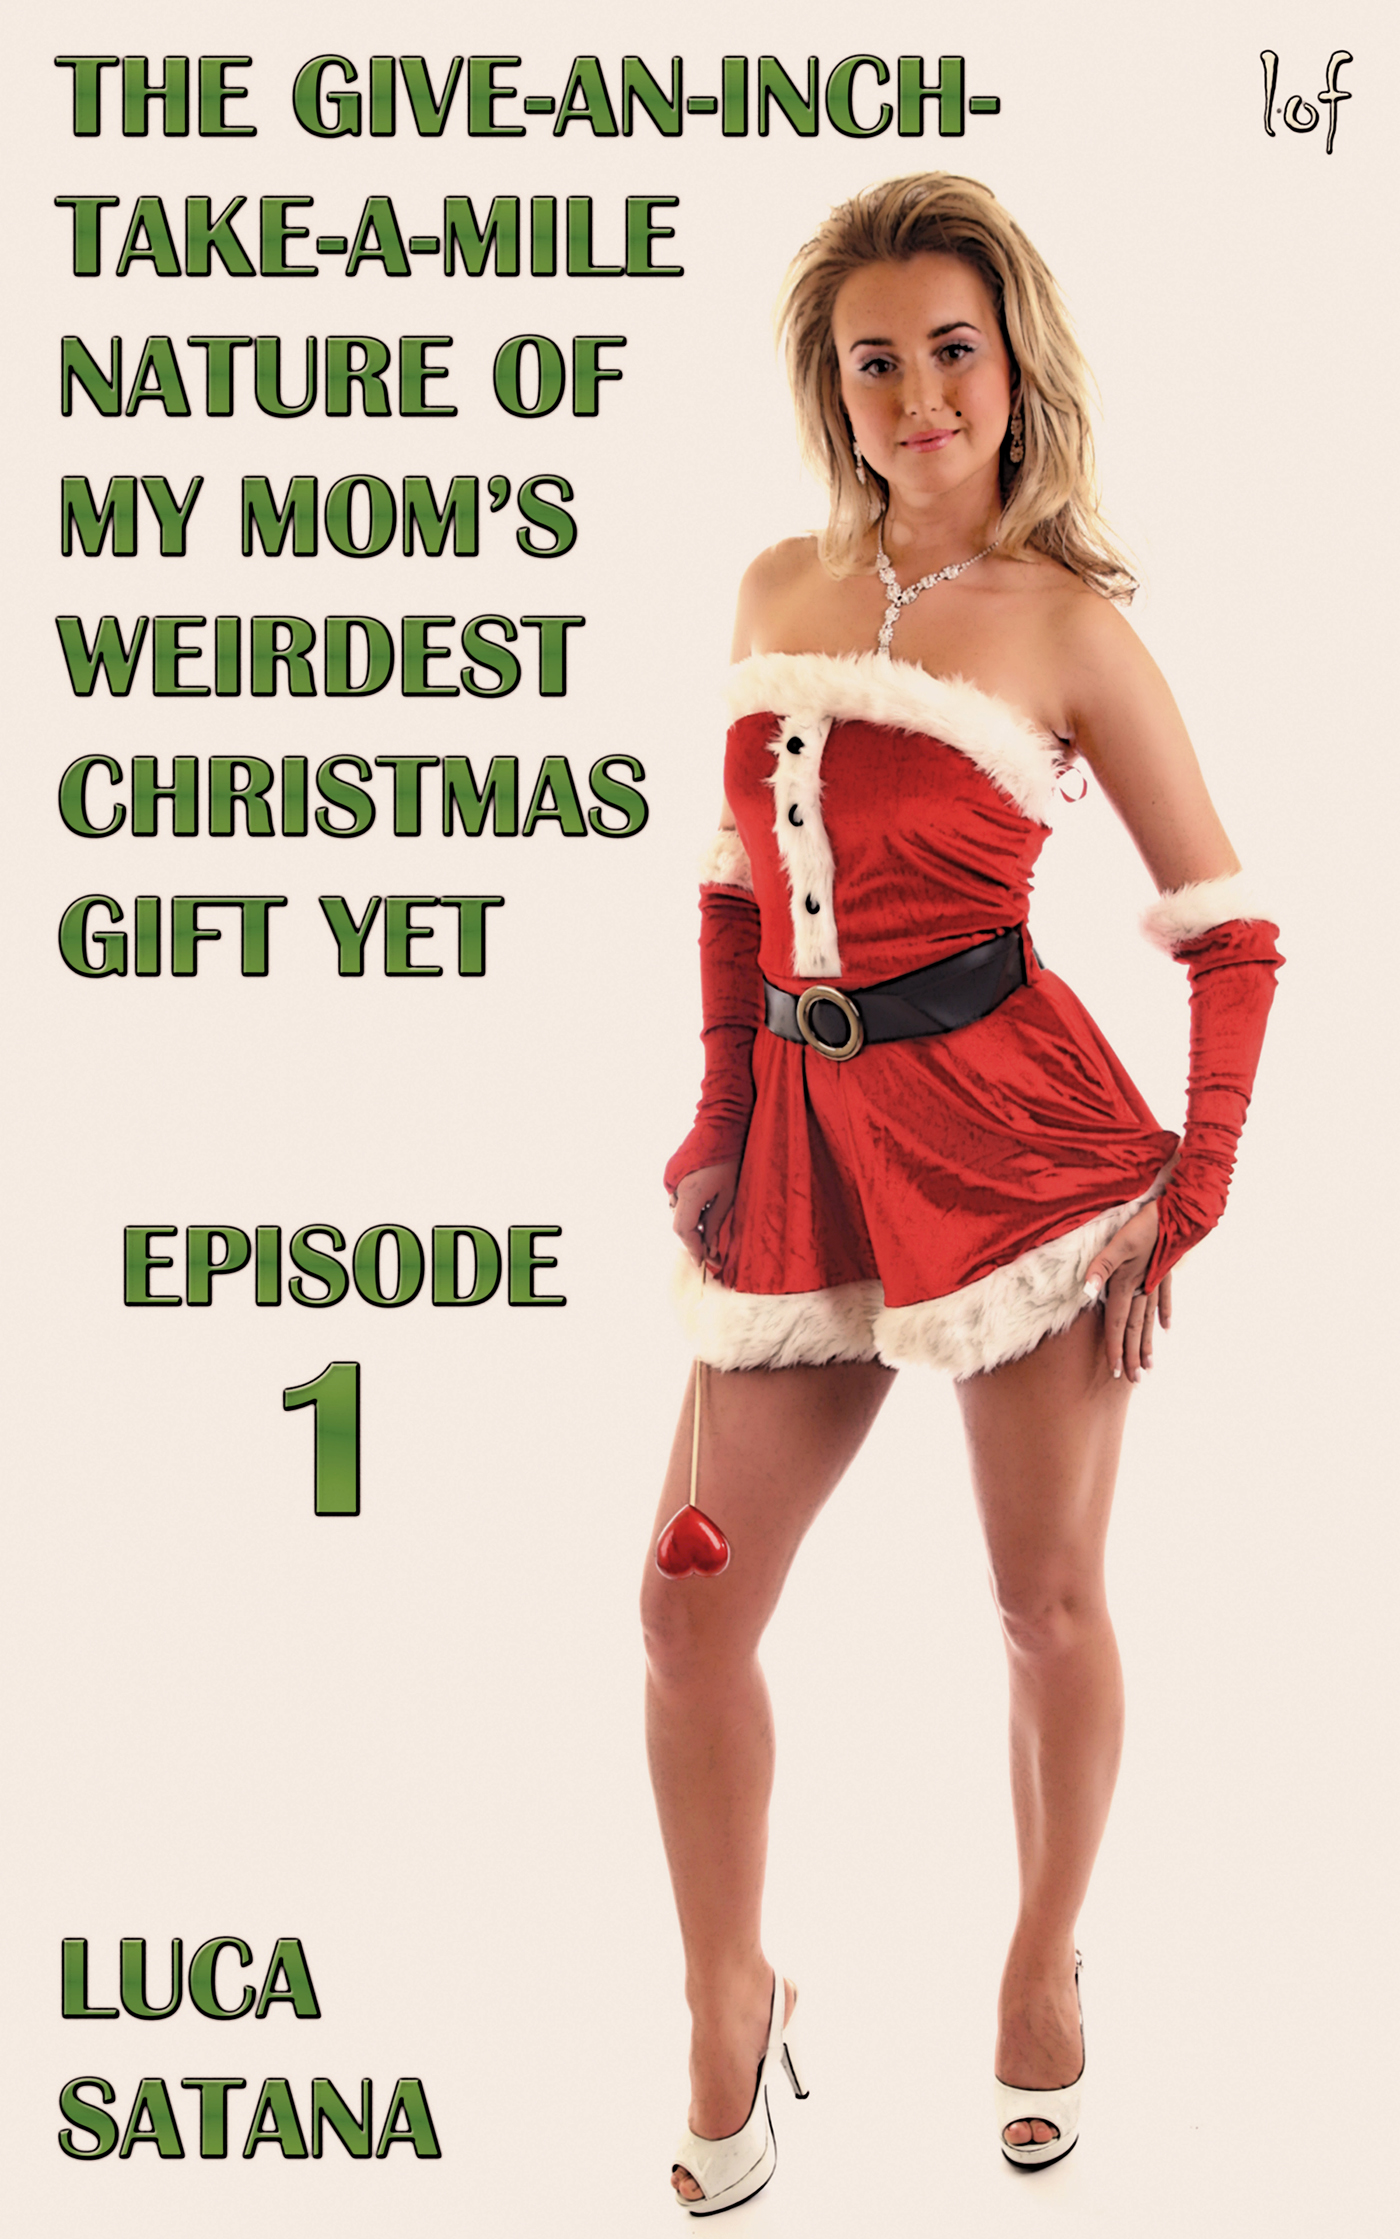 The Give-An-Inch-Take-A-Mile Nature Of My Mom's Weirdest Christmas Gift Yet: Episode 1